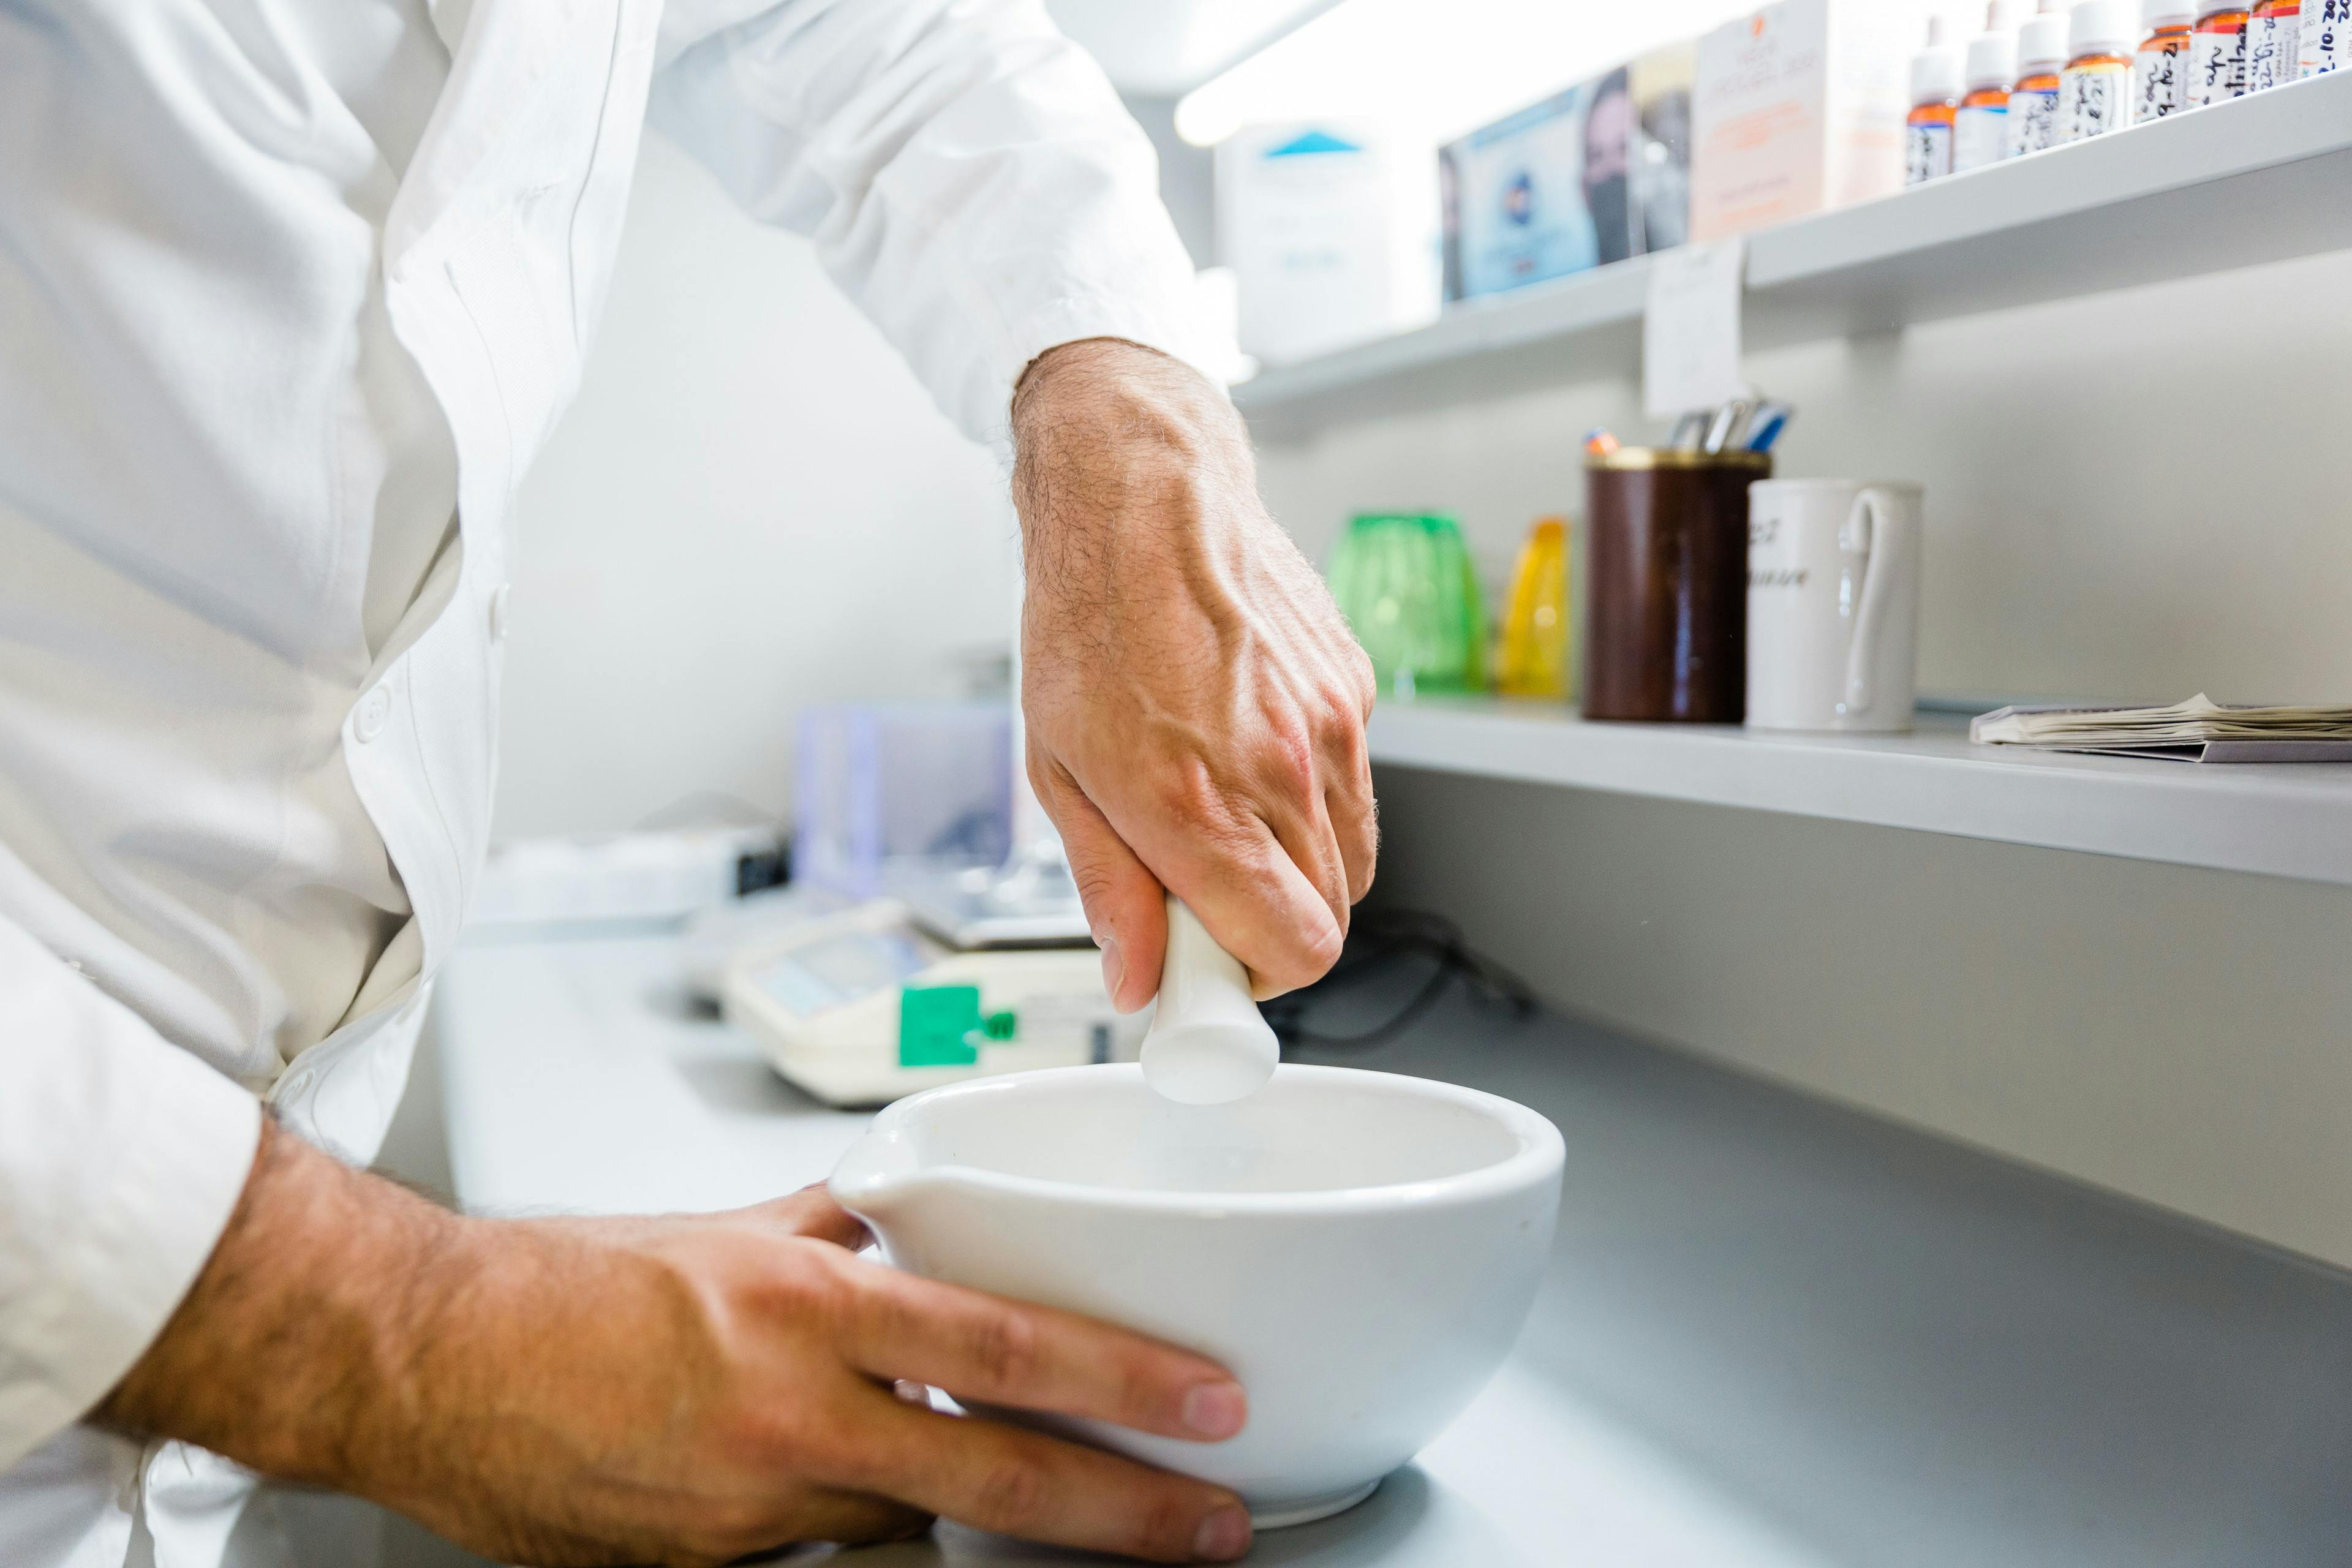 Millions of medicines are compounded each year to meet the unique needs of patients, say if they're allergic to an excipient, or they don't have access to the right concentration or dosage. Image Credit: © Nadia - stock.adobe.com